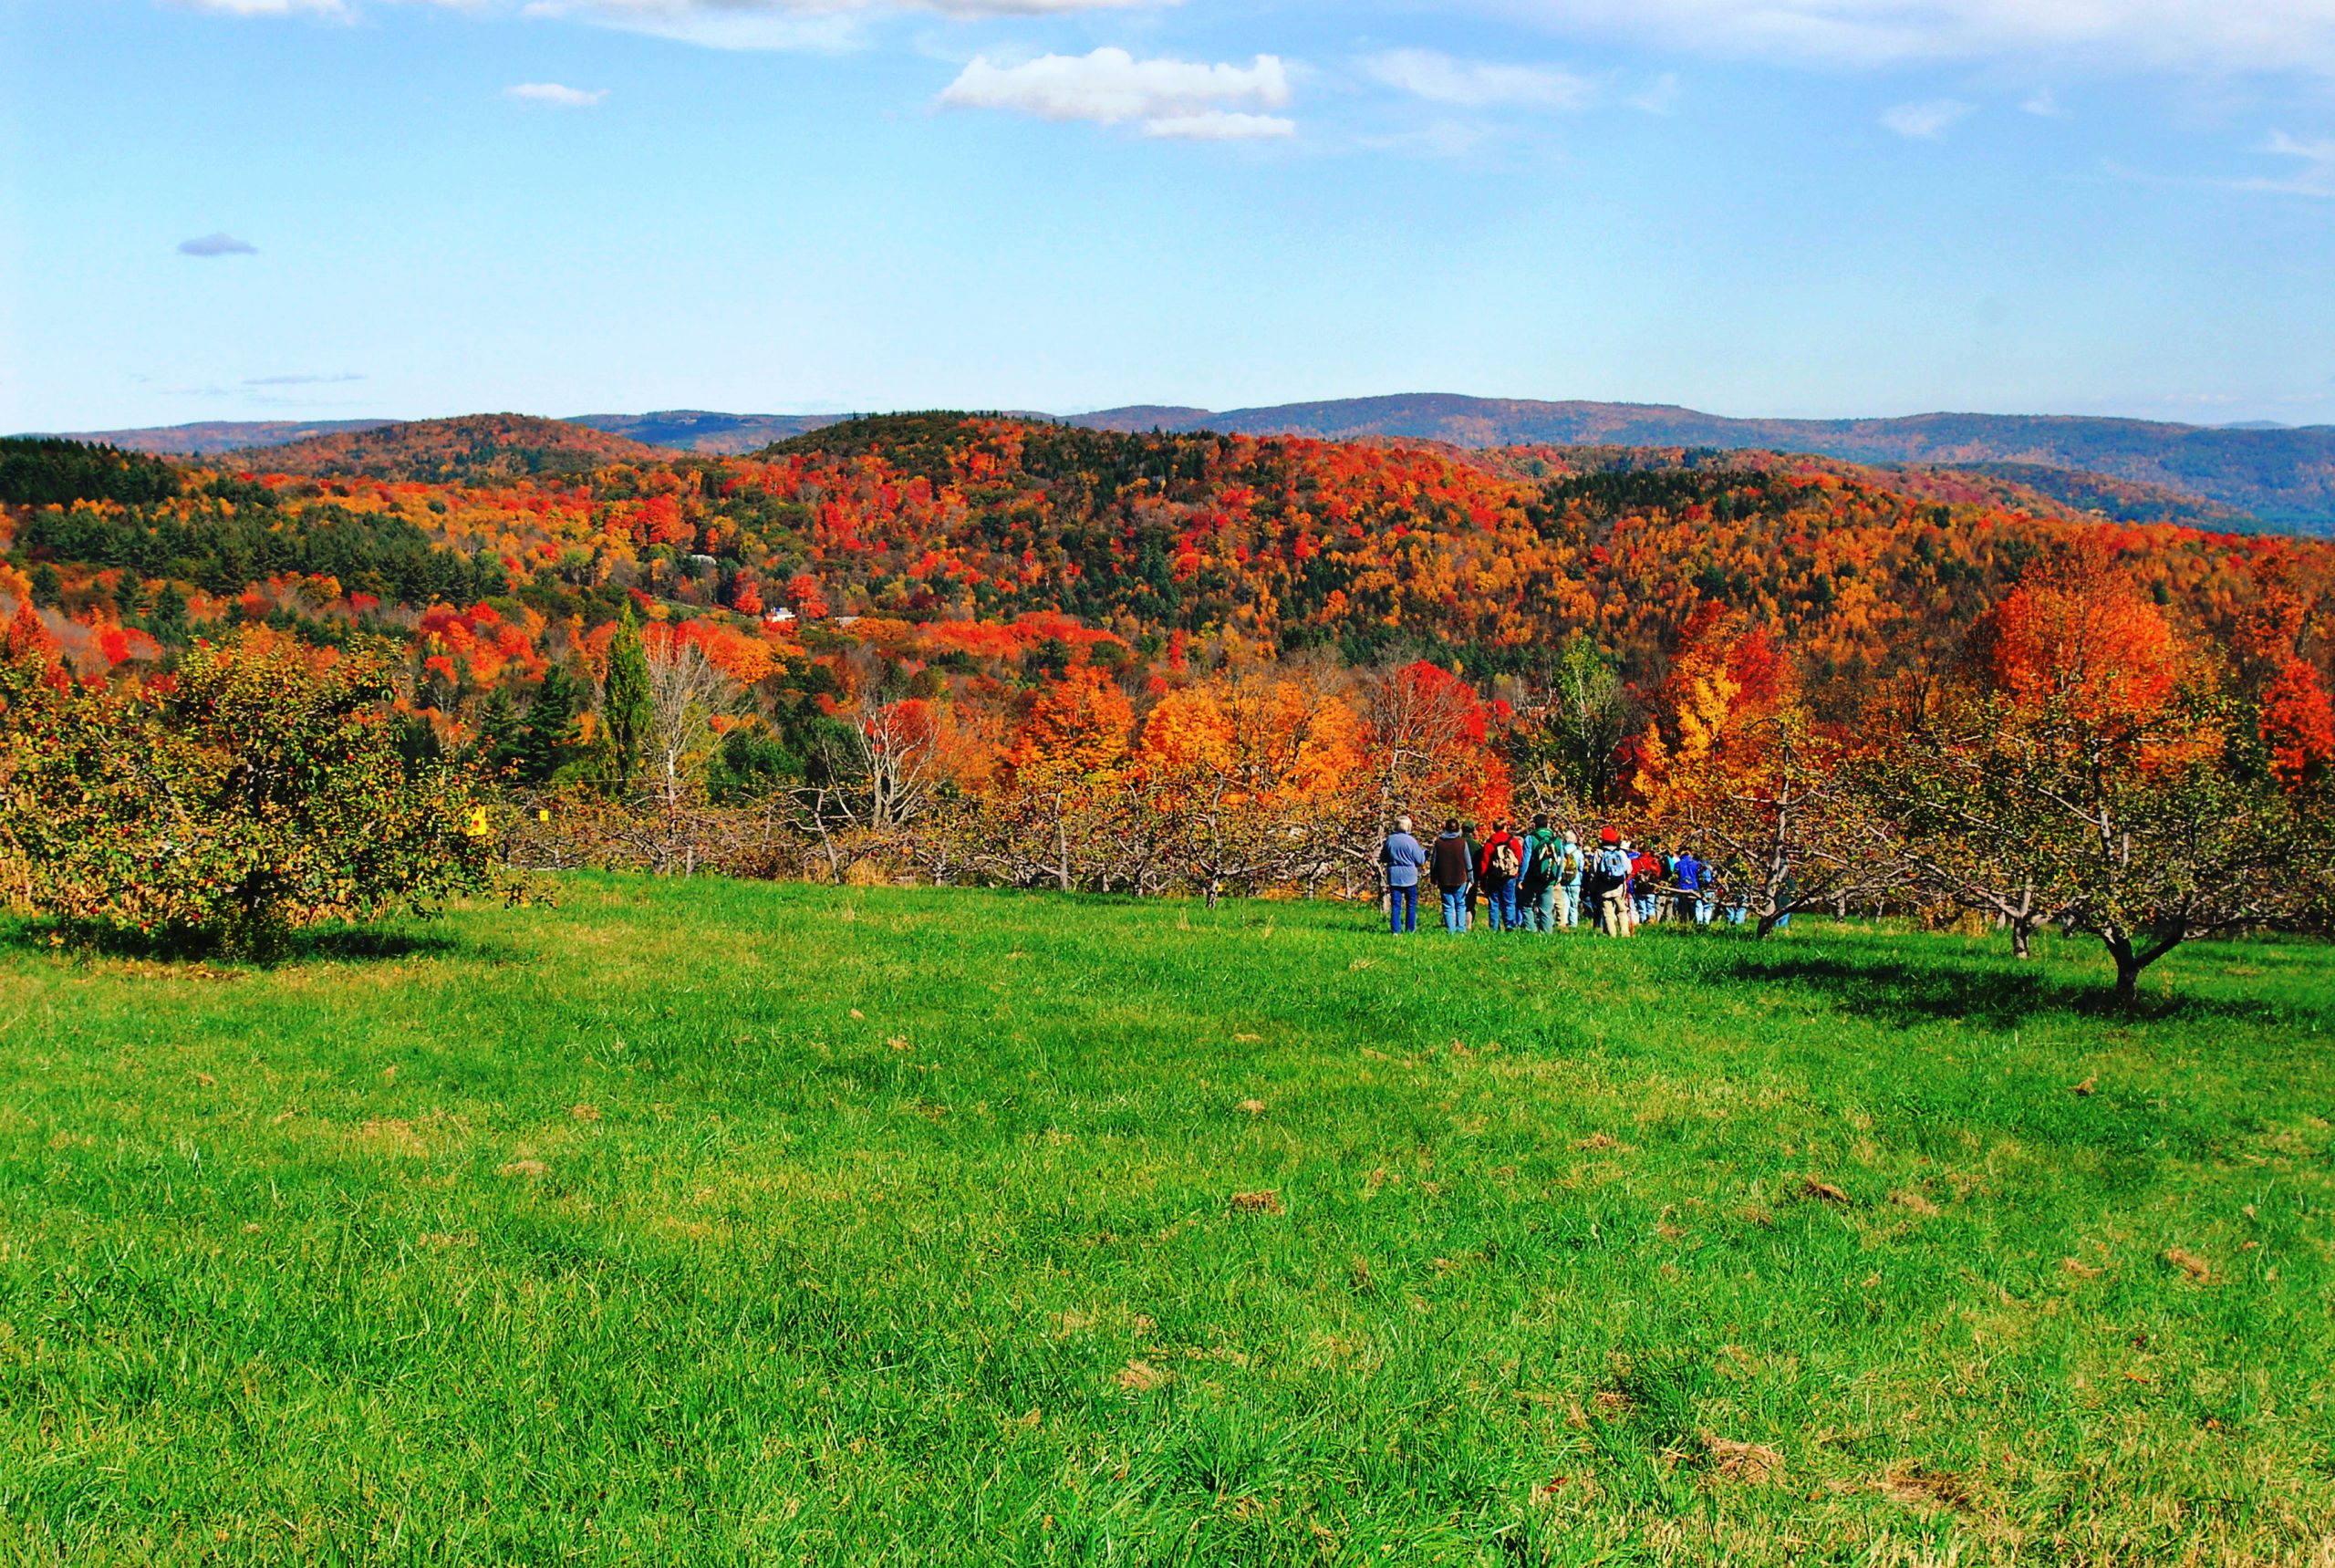 A group stands on a green hilltop overlooking colorful fall trees and hills in the distance